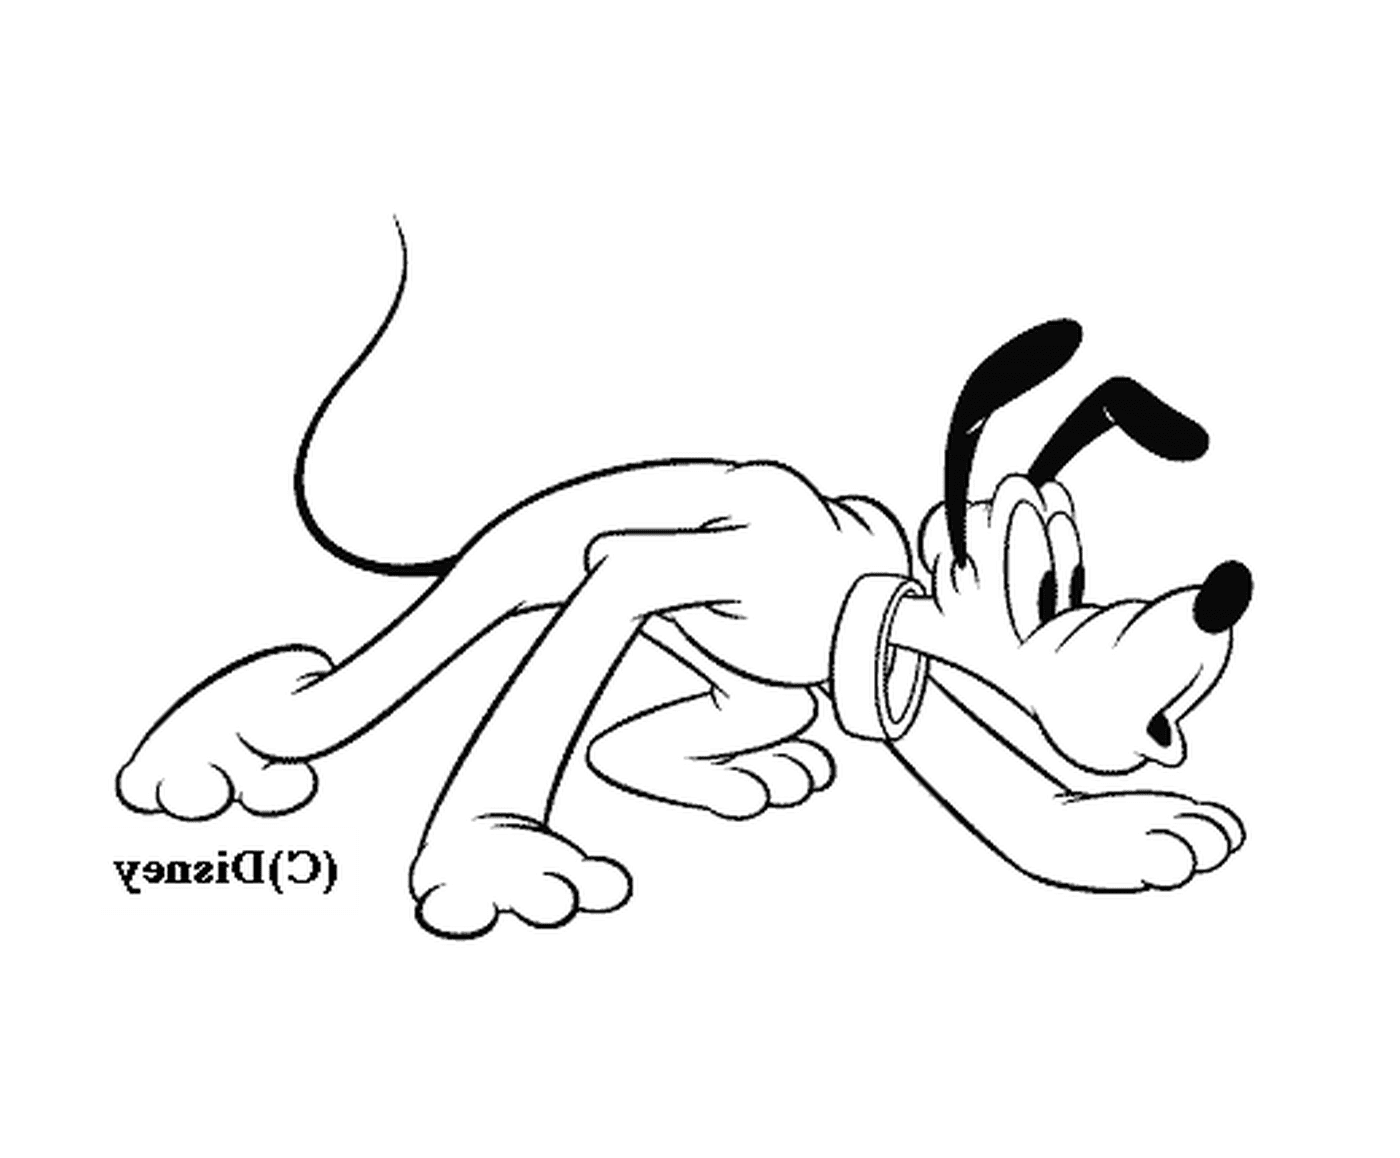  Cartoon of a dog with a necklace around the neck 